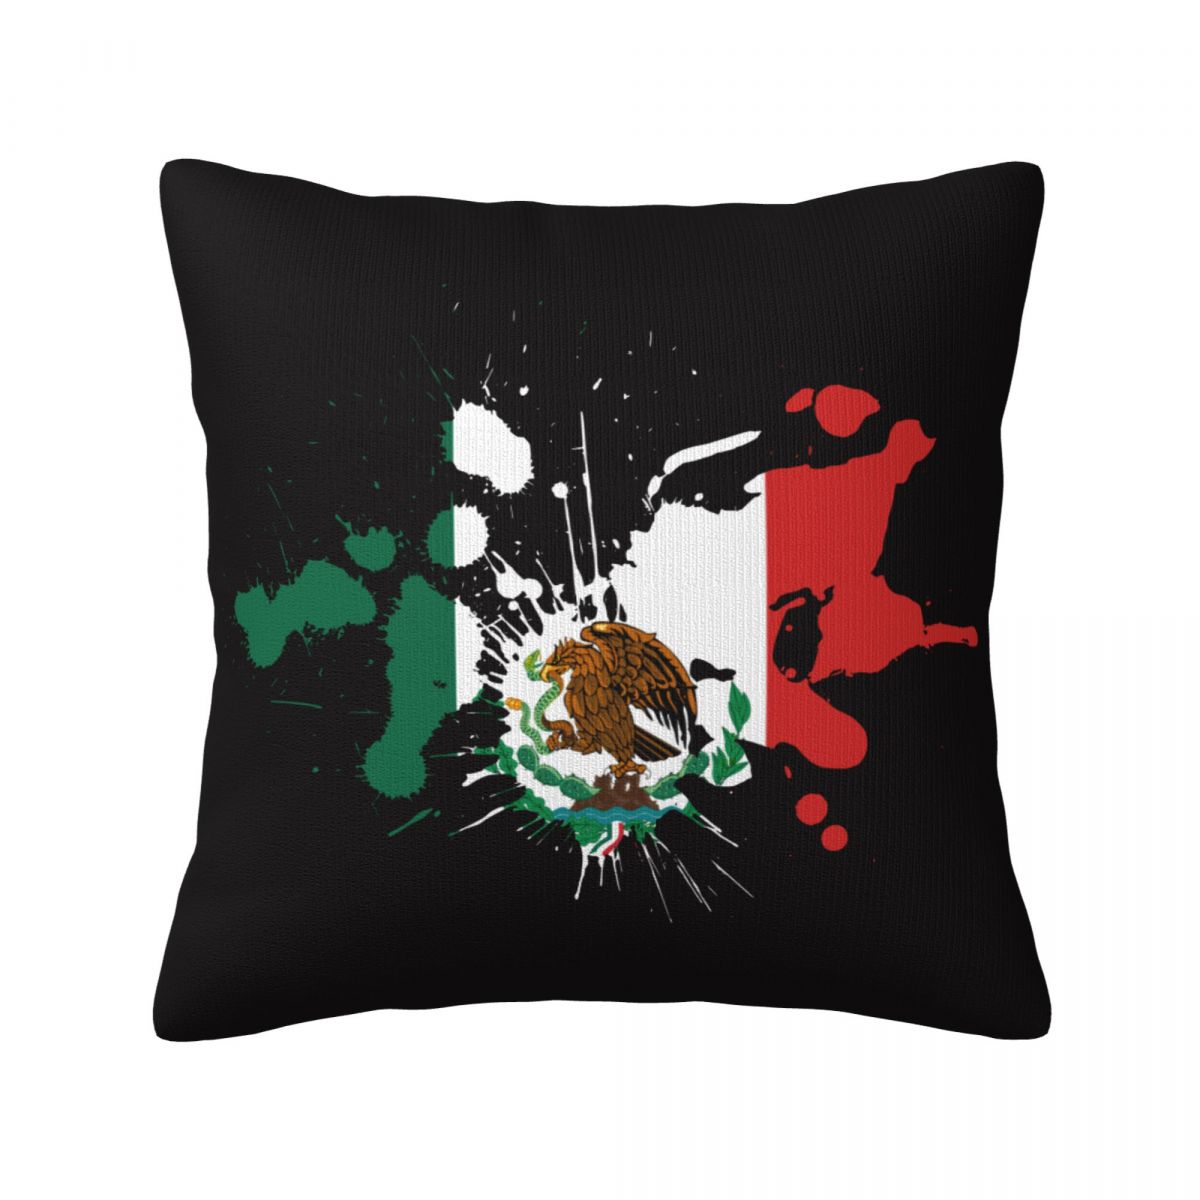 Mexico Ink Spatter Decorative Square Throw Pillow Covers